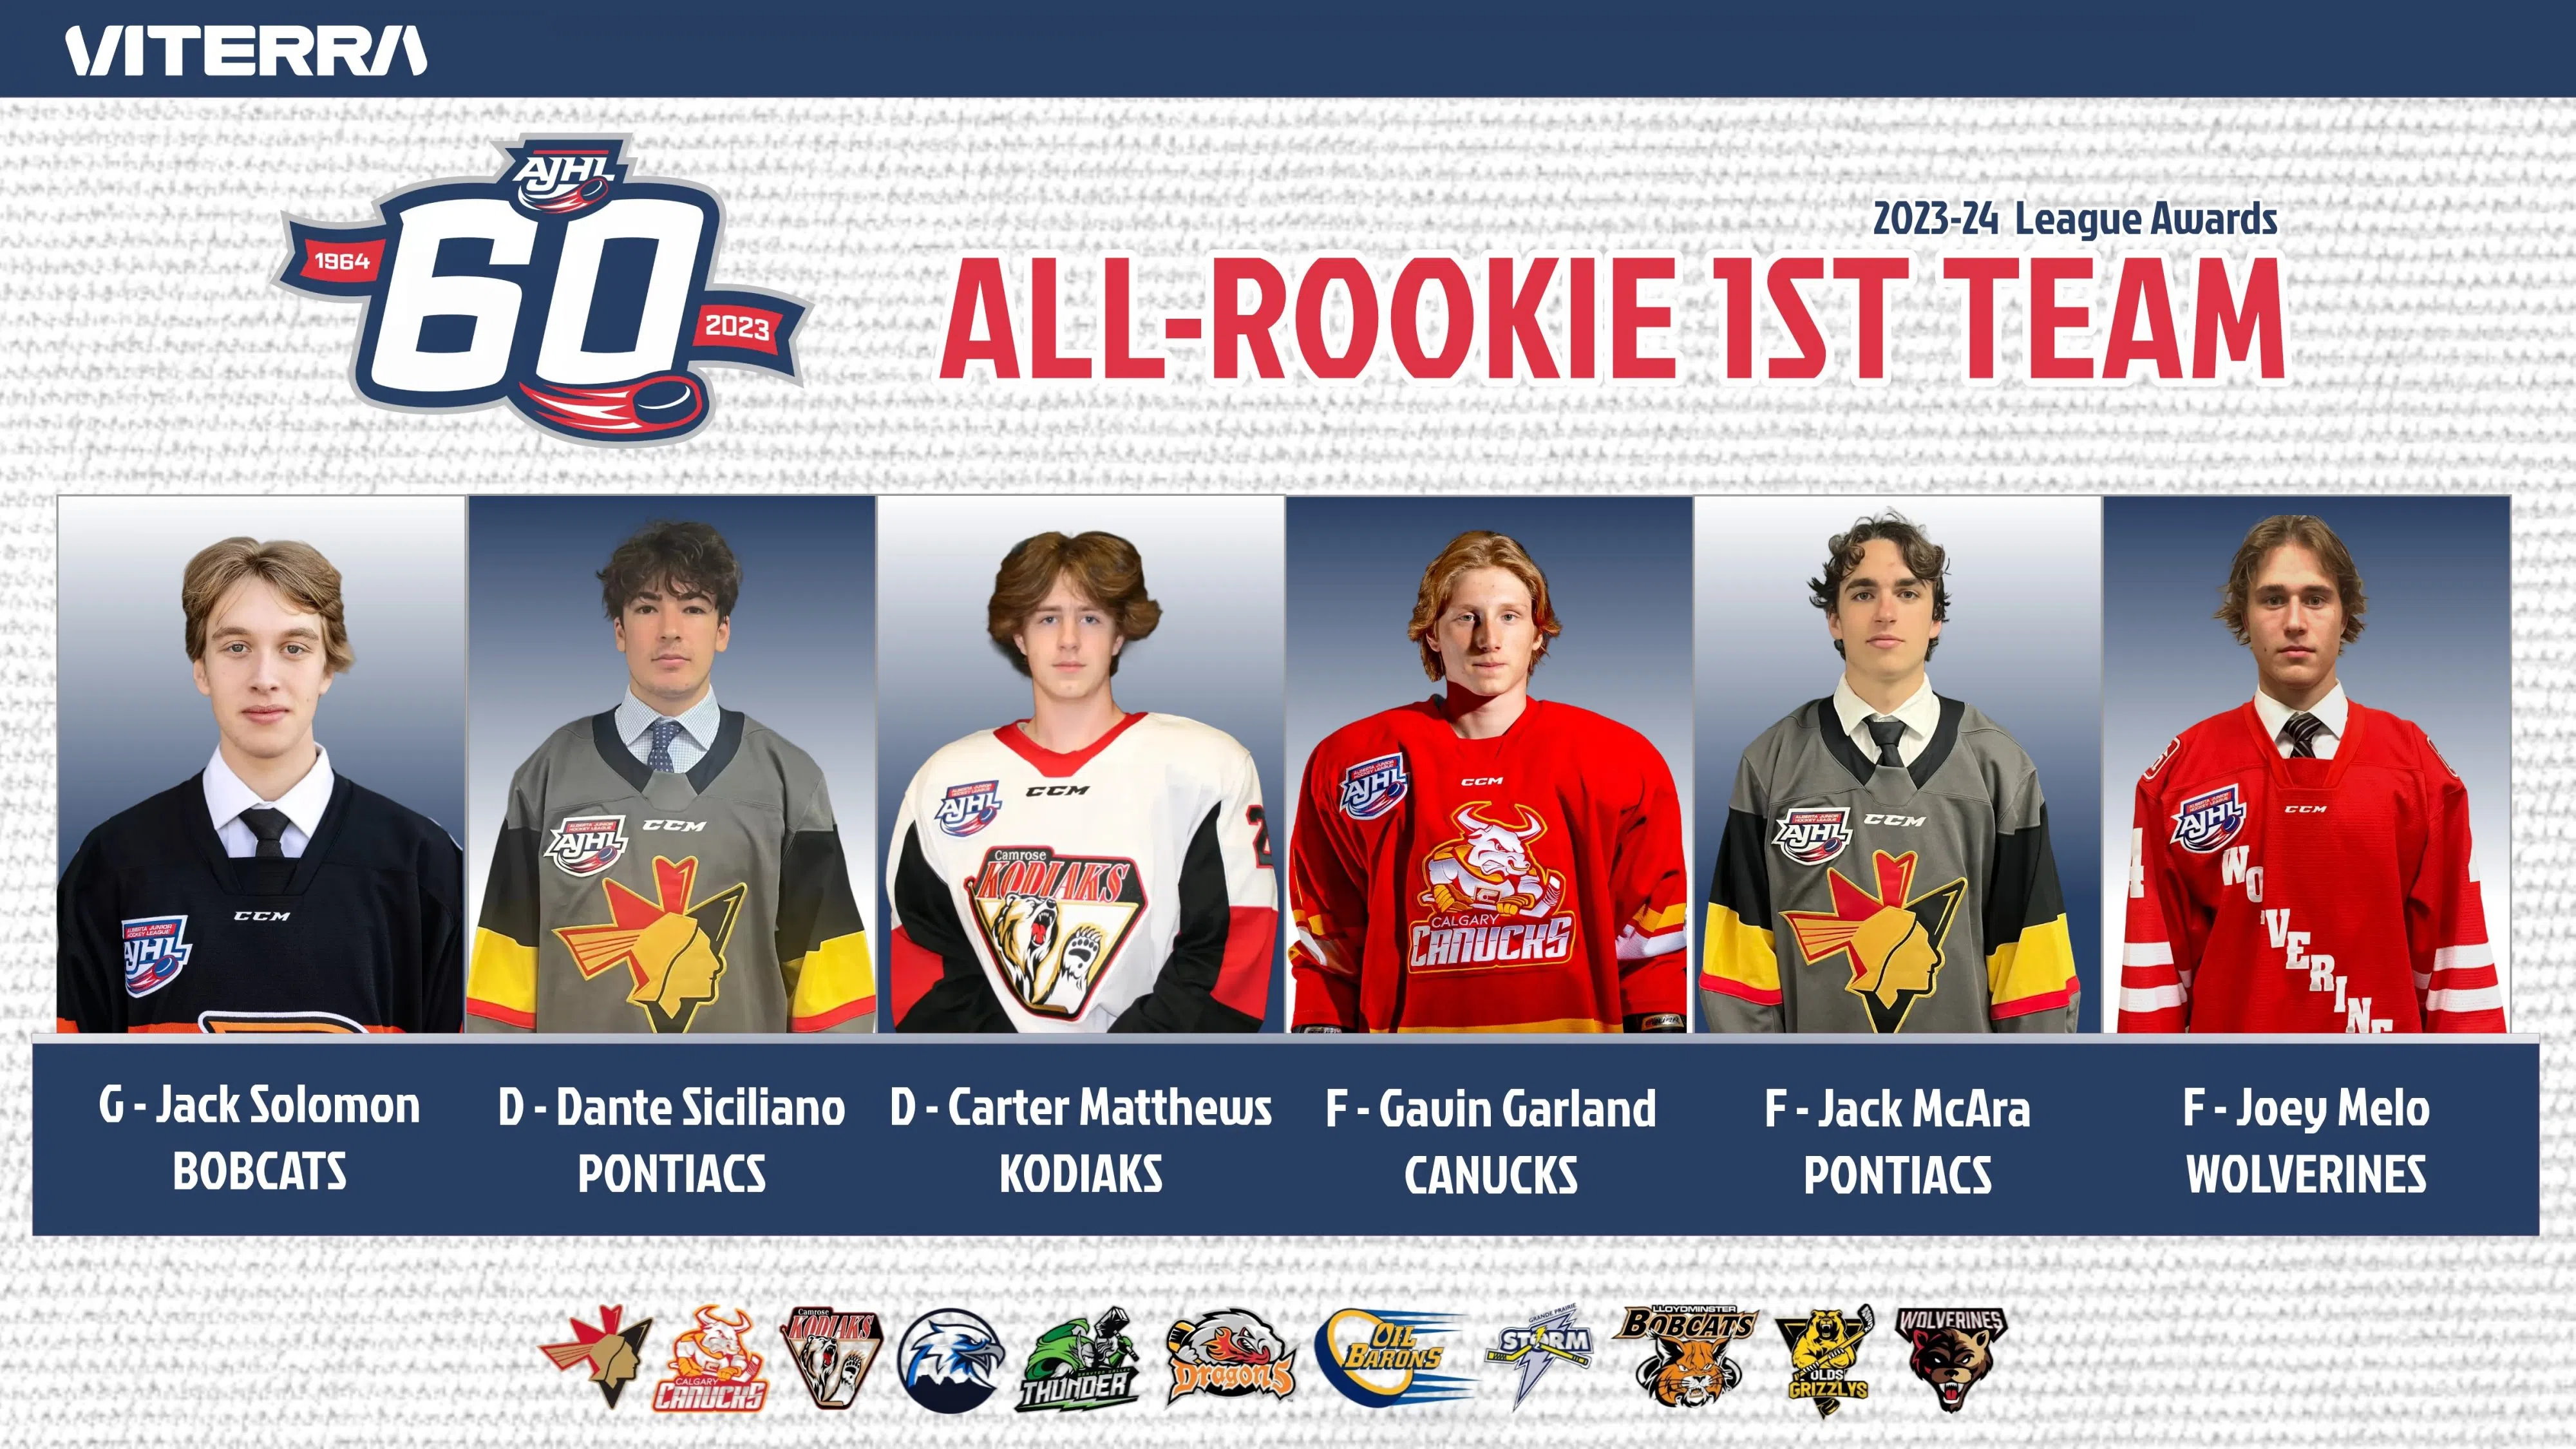 Two Wolverines named to 2023/24 Viterra AJHL All-Rookie Teams